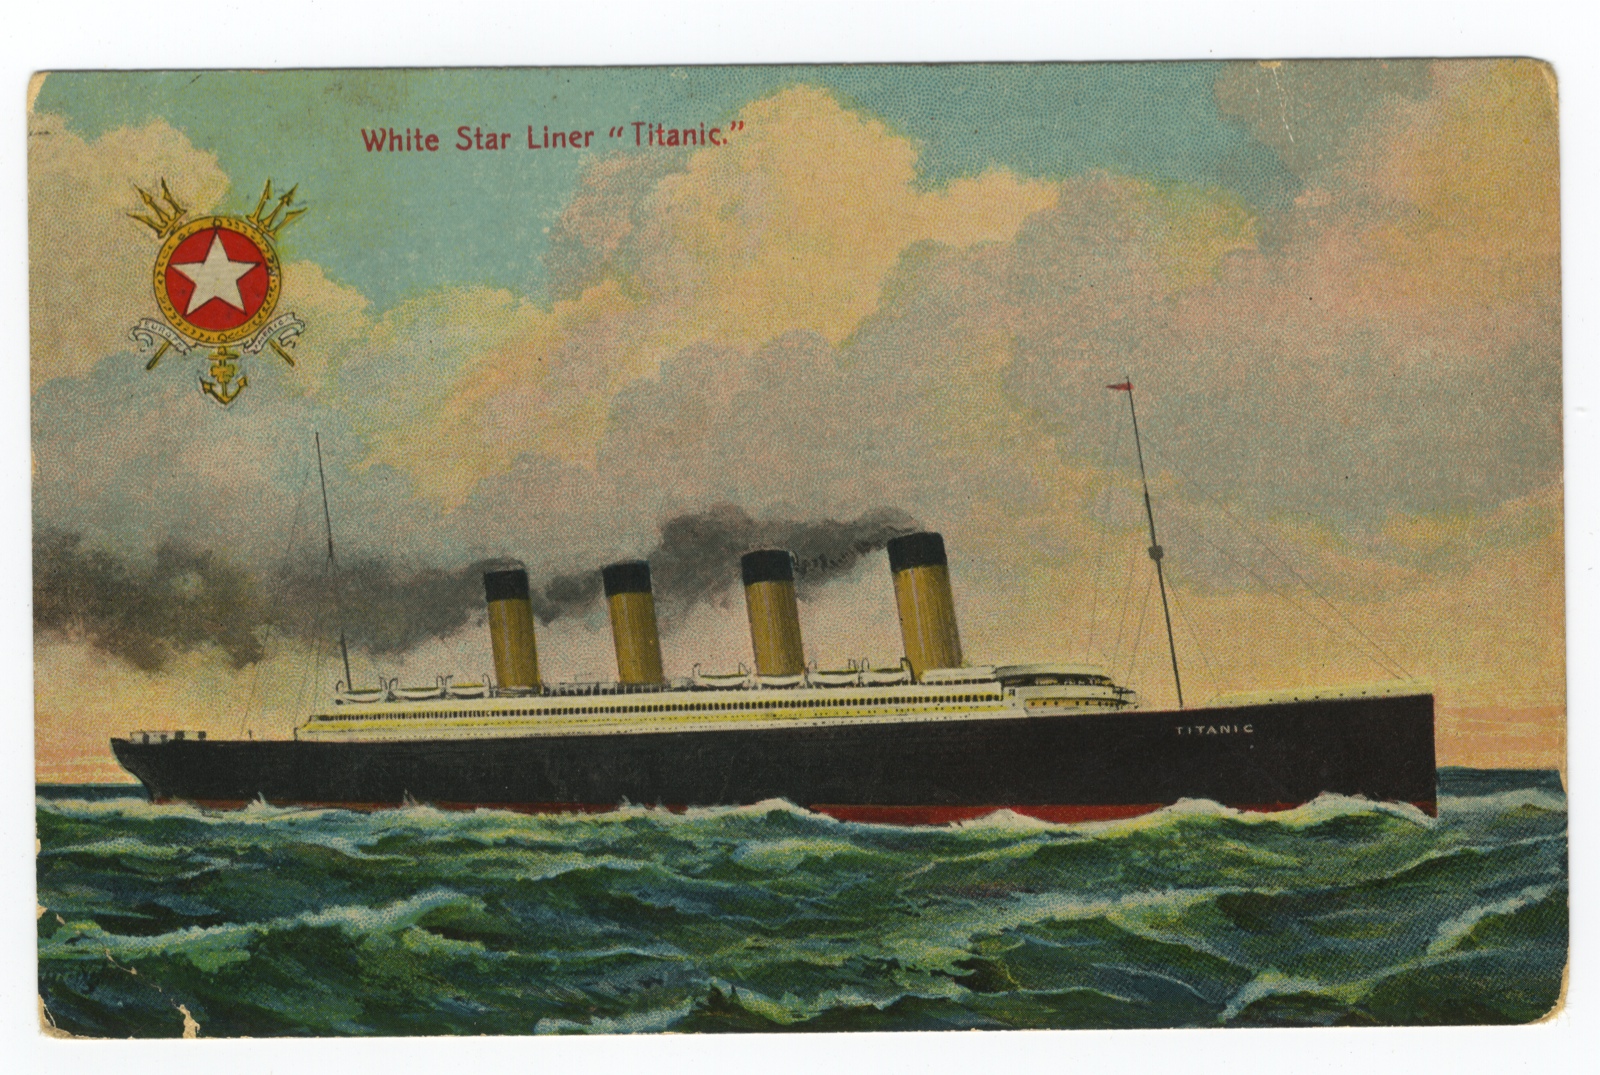 Titanic Postcard: Rare Postcard From the Titanic - Sent at Beginning of Voyage; Ship "A Peach," In NY "Next Tuesday"